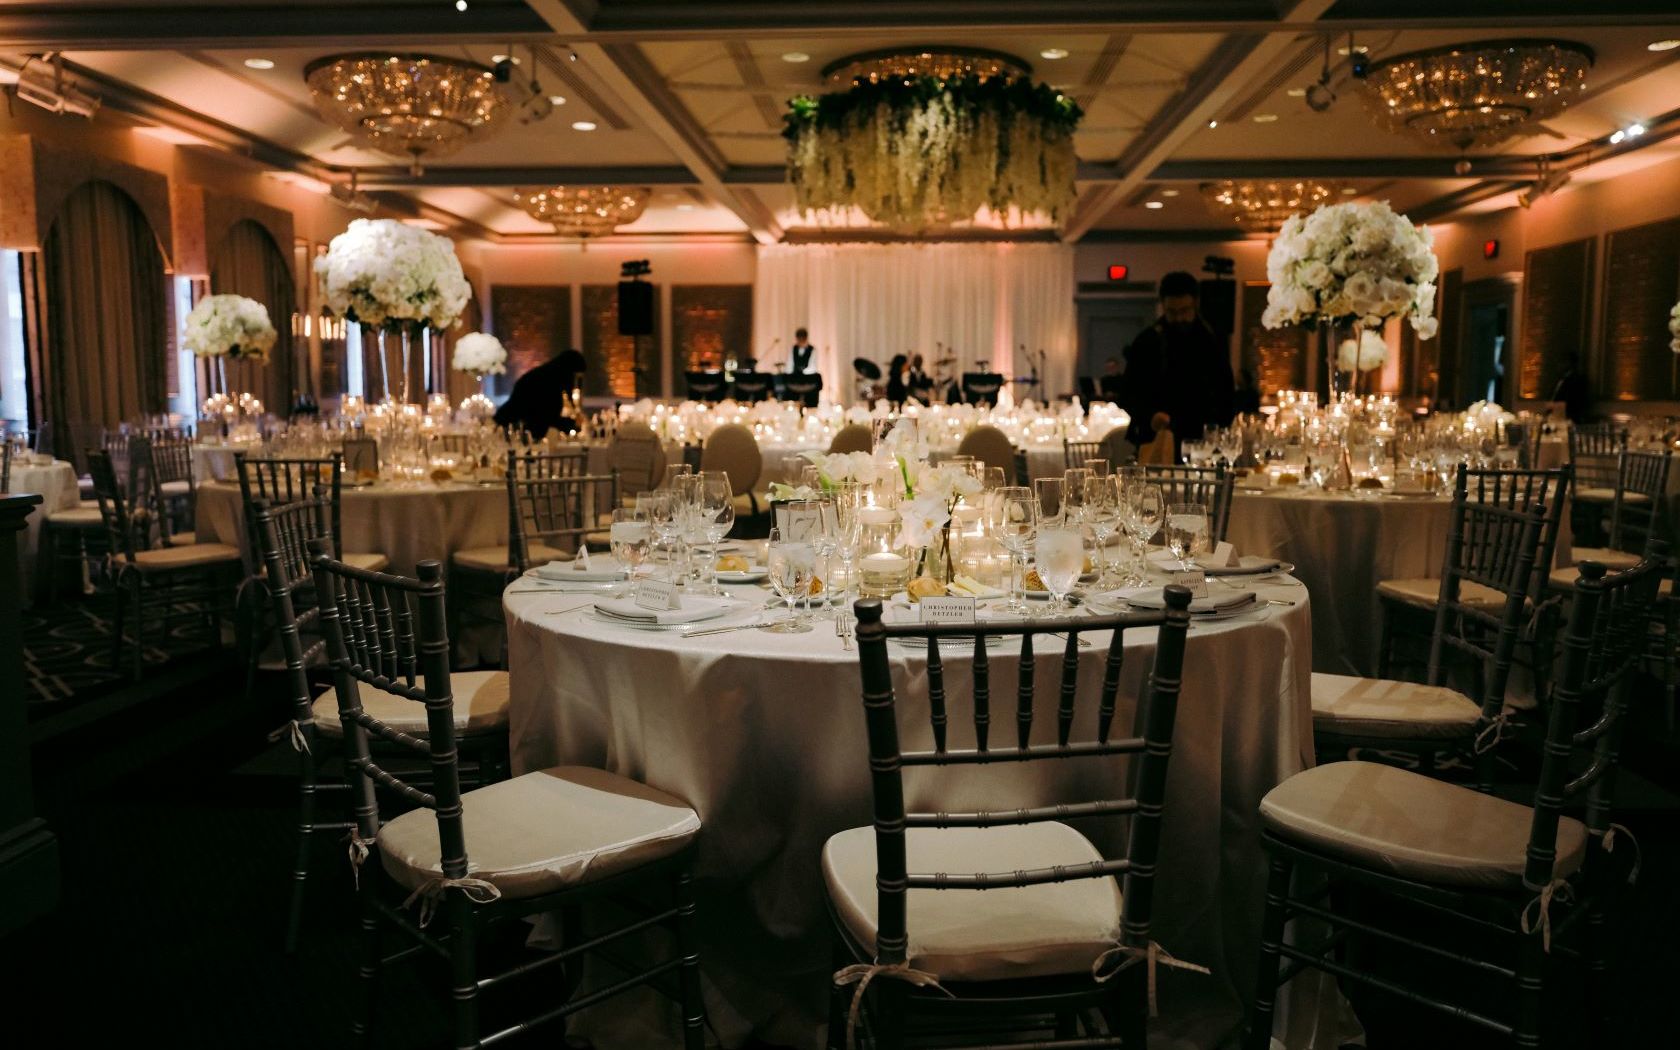 A Large Dining Room With Tables Set For A Formal Dinner